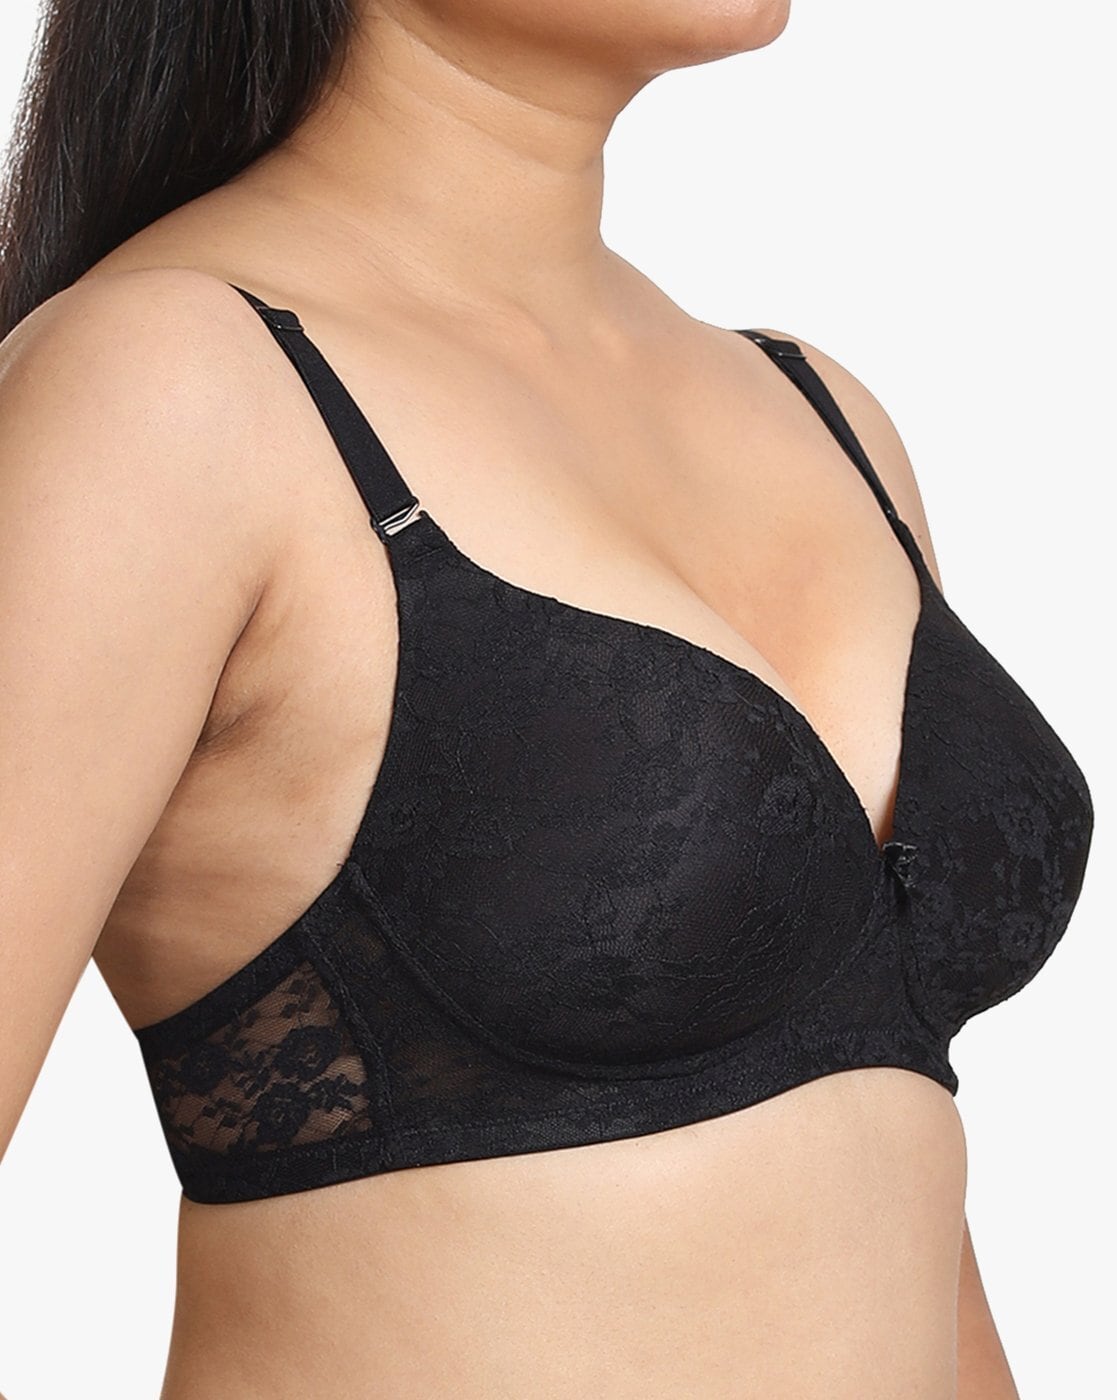 Shyle Nylon Spandex Black Push Up Bra - Get Best Price from Manufacturers &  Suppliers in India